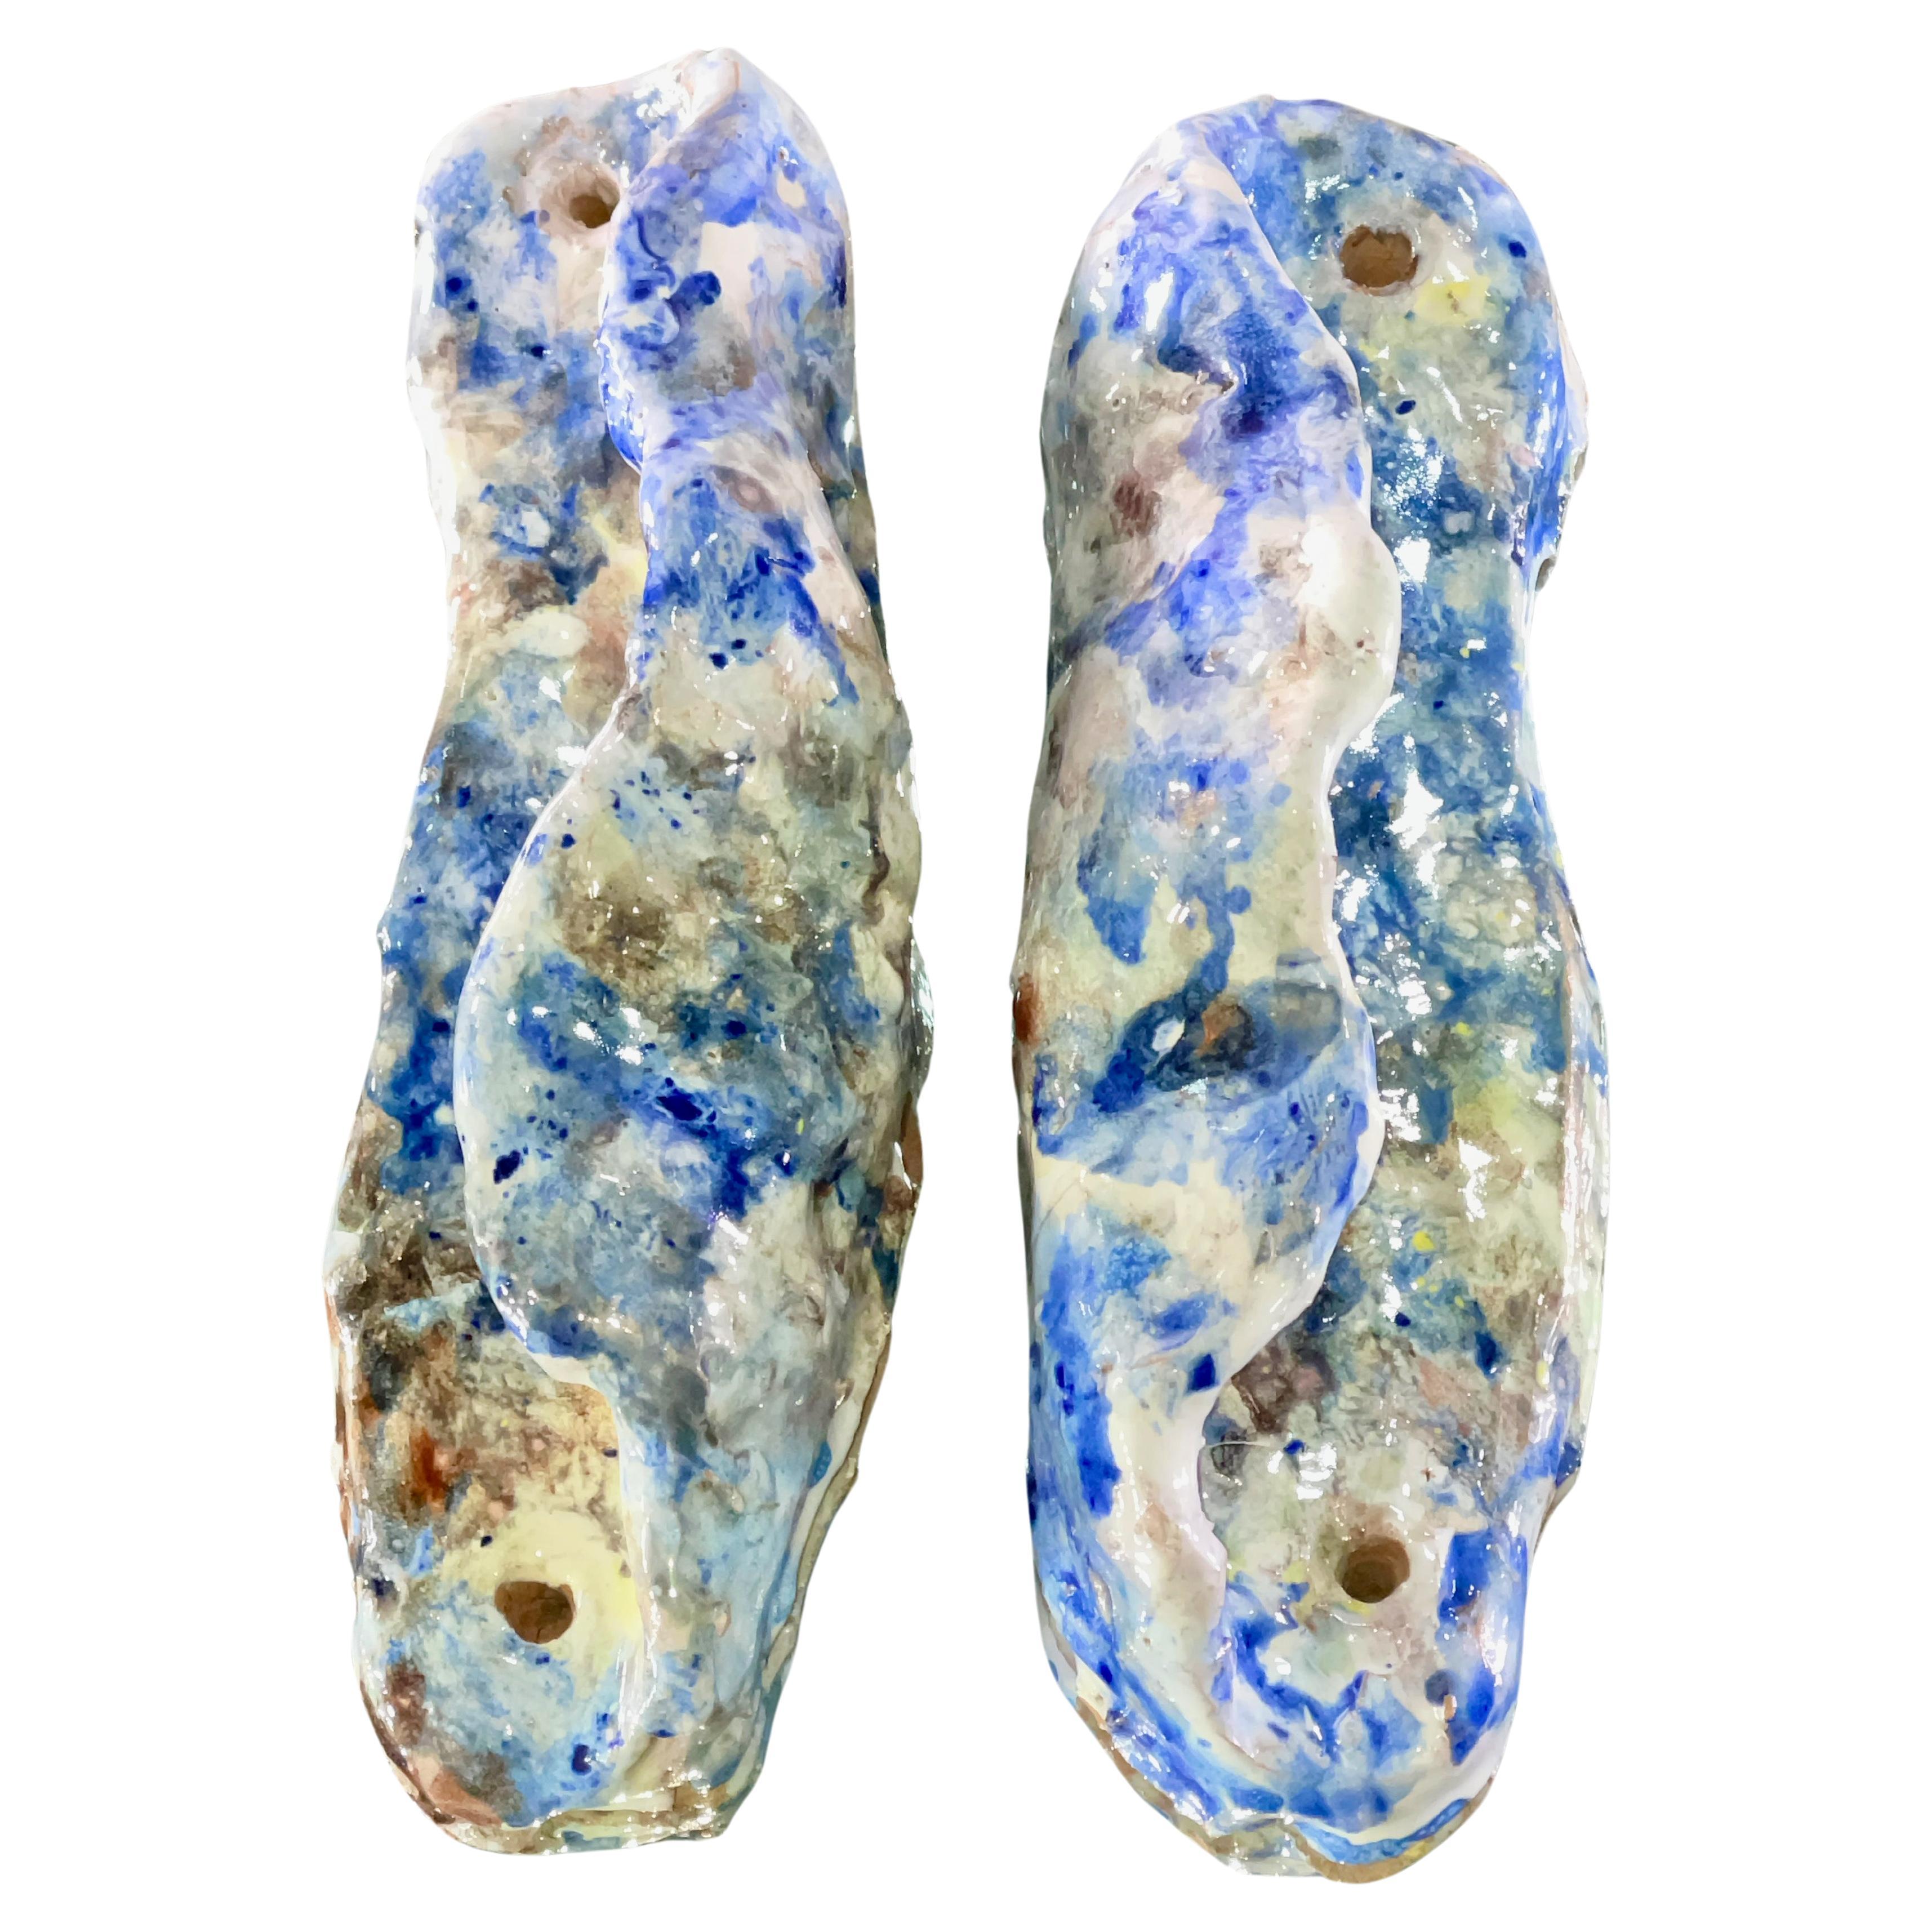 Fausto Melotti Pair of Abstract Glazed Ceramic Door Pulls For Sale